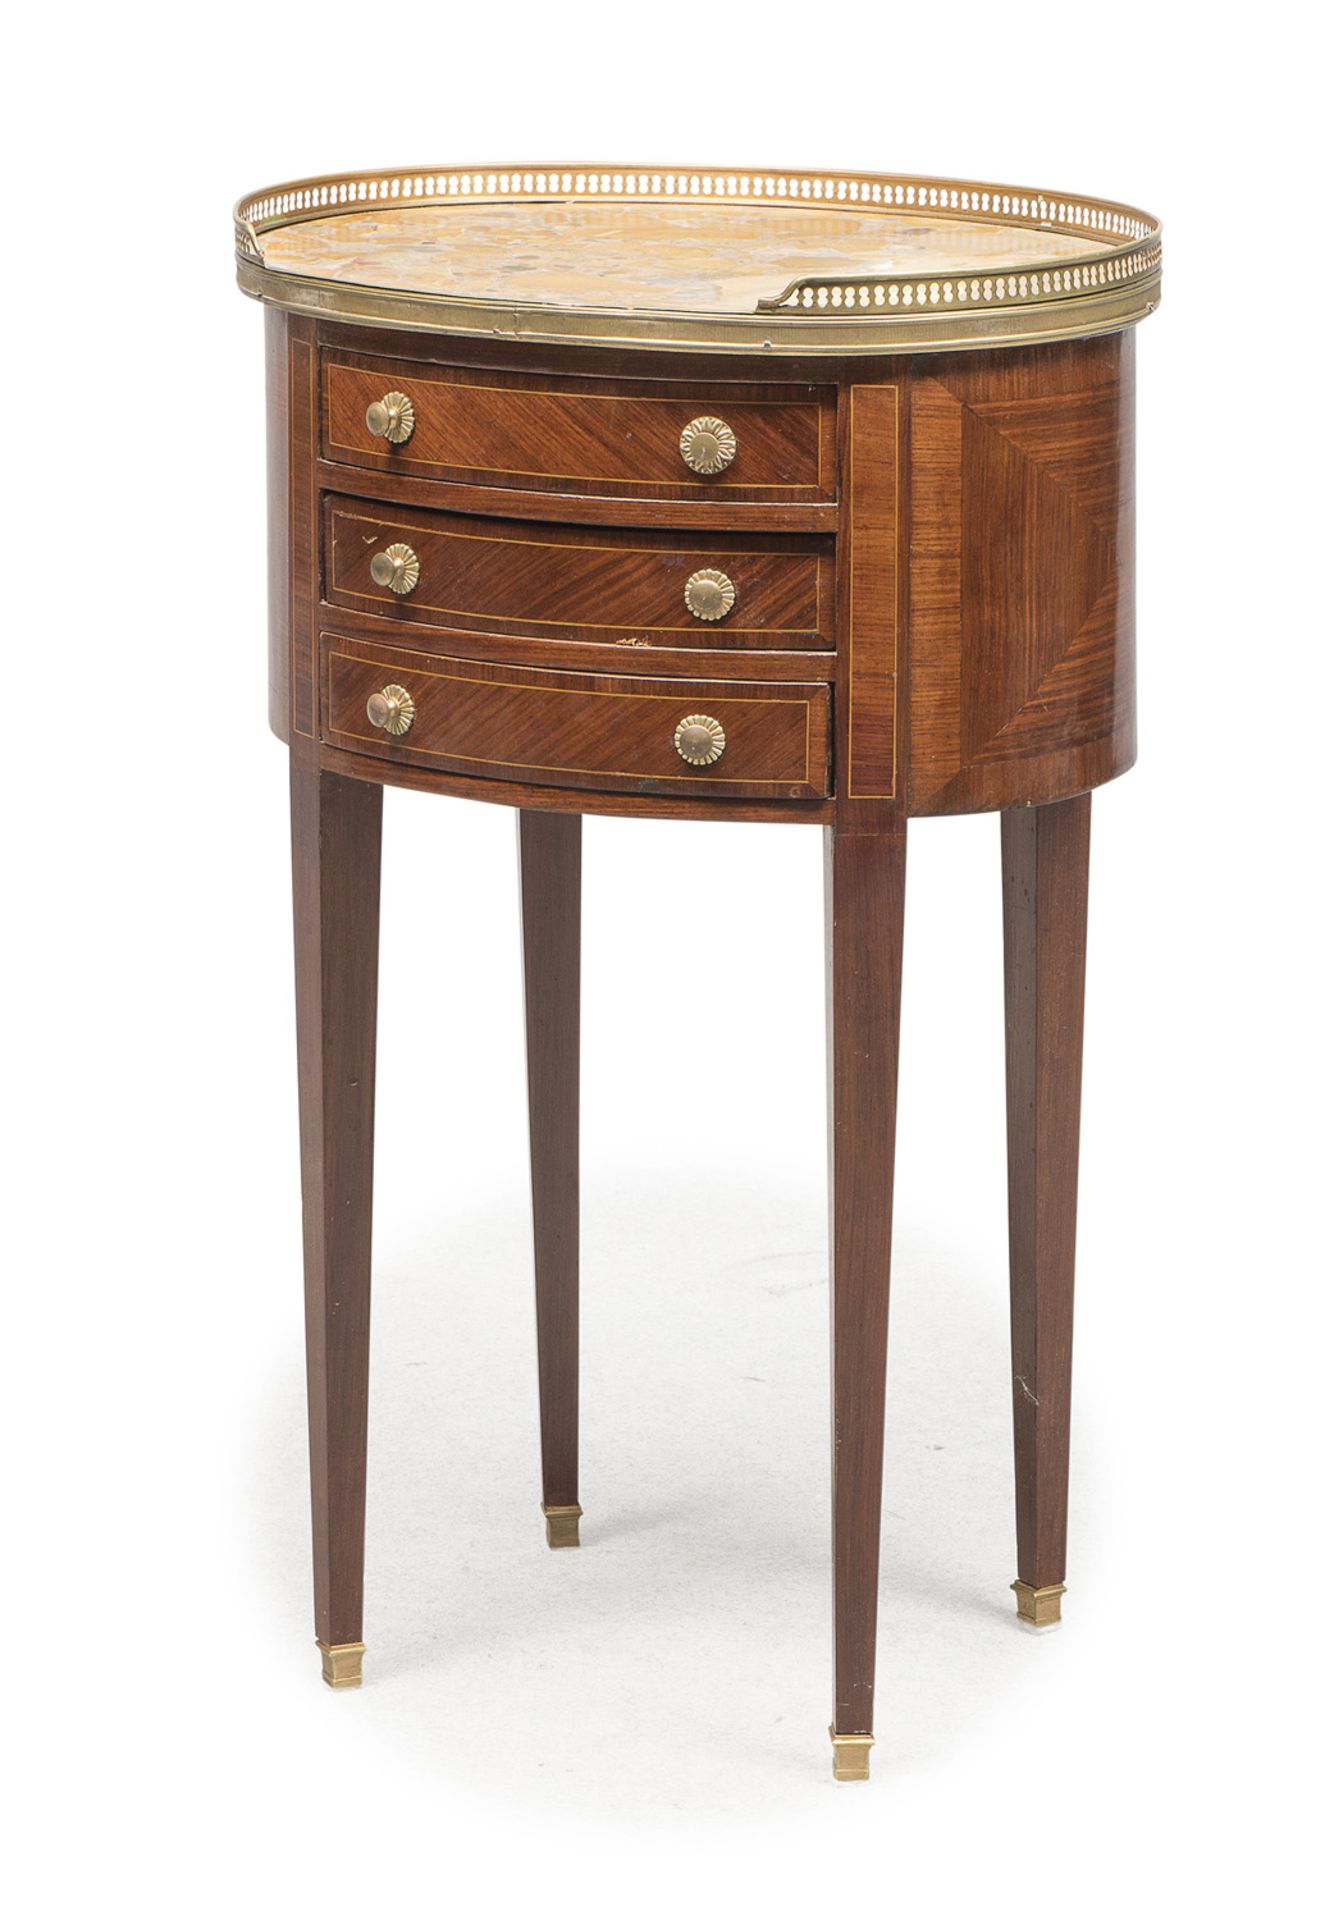 BEDSIDE TABLE IN VIOLET EBONY FRANCE 19TH CENTURY